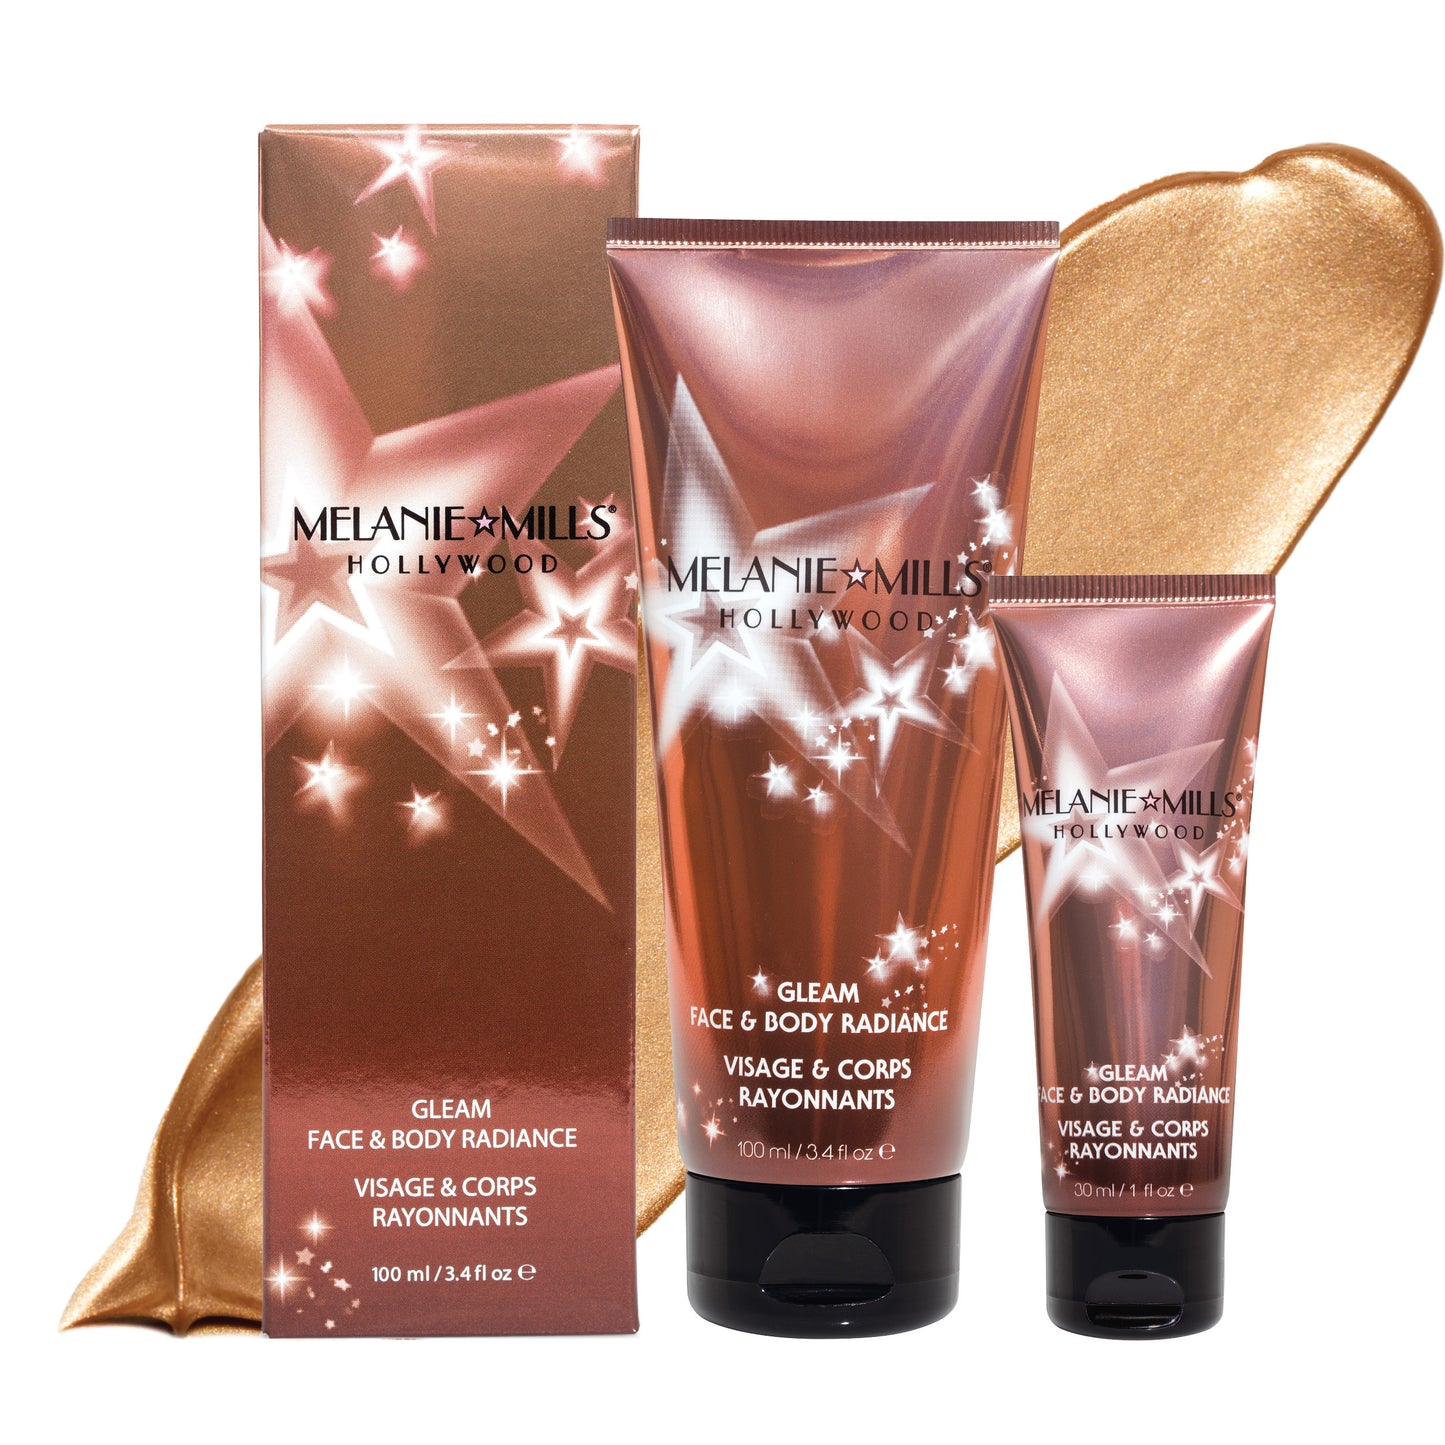 Melanie Mills Hollywood Gleam Body Radiance All In One Makeup, Moisturiser & Glow For Face & Body Peach Deluxe